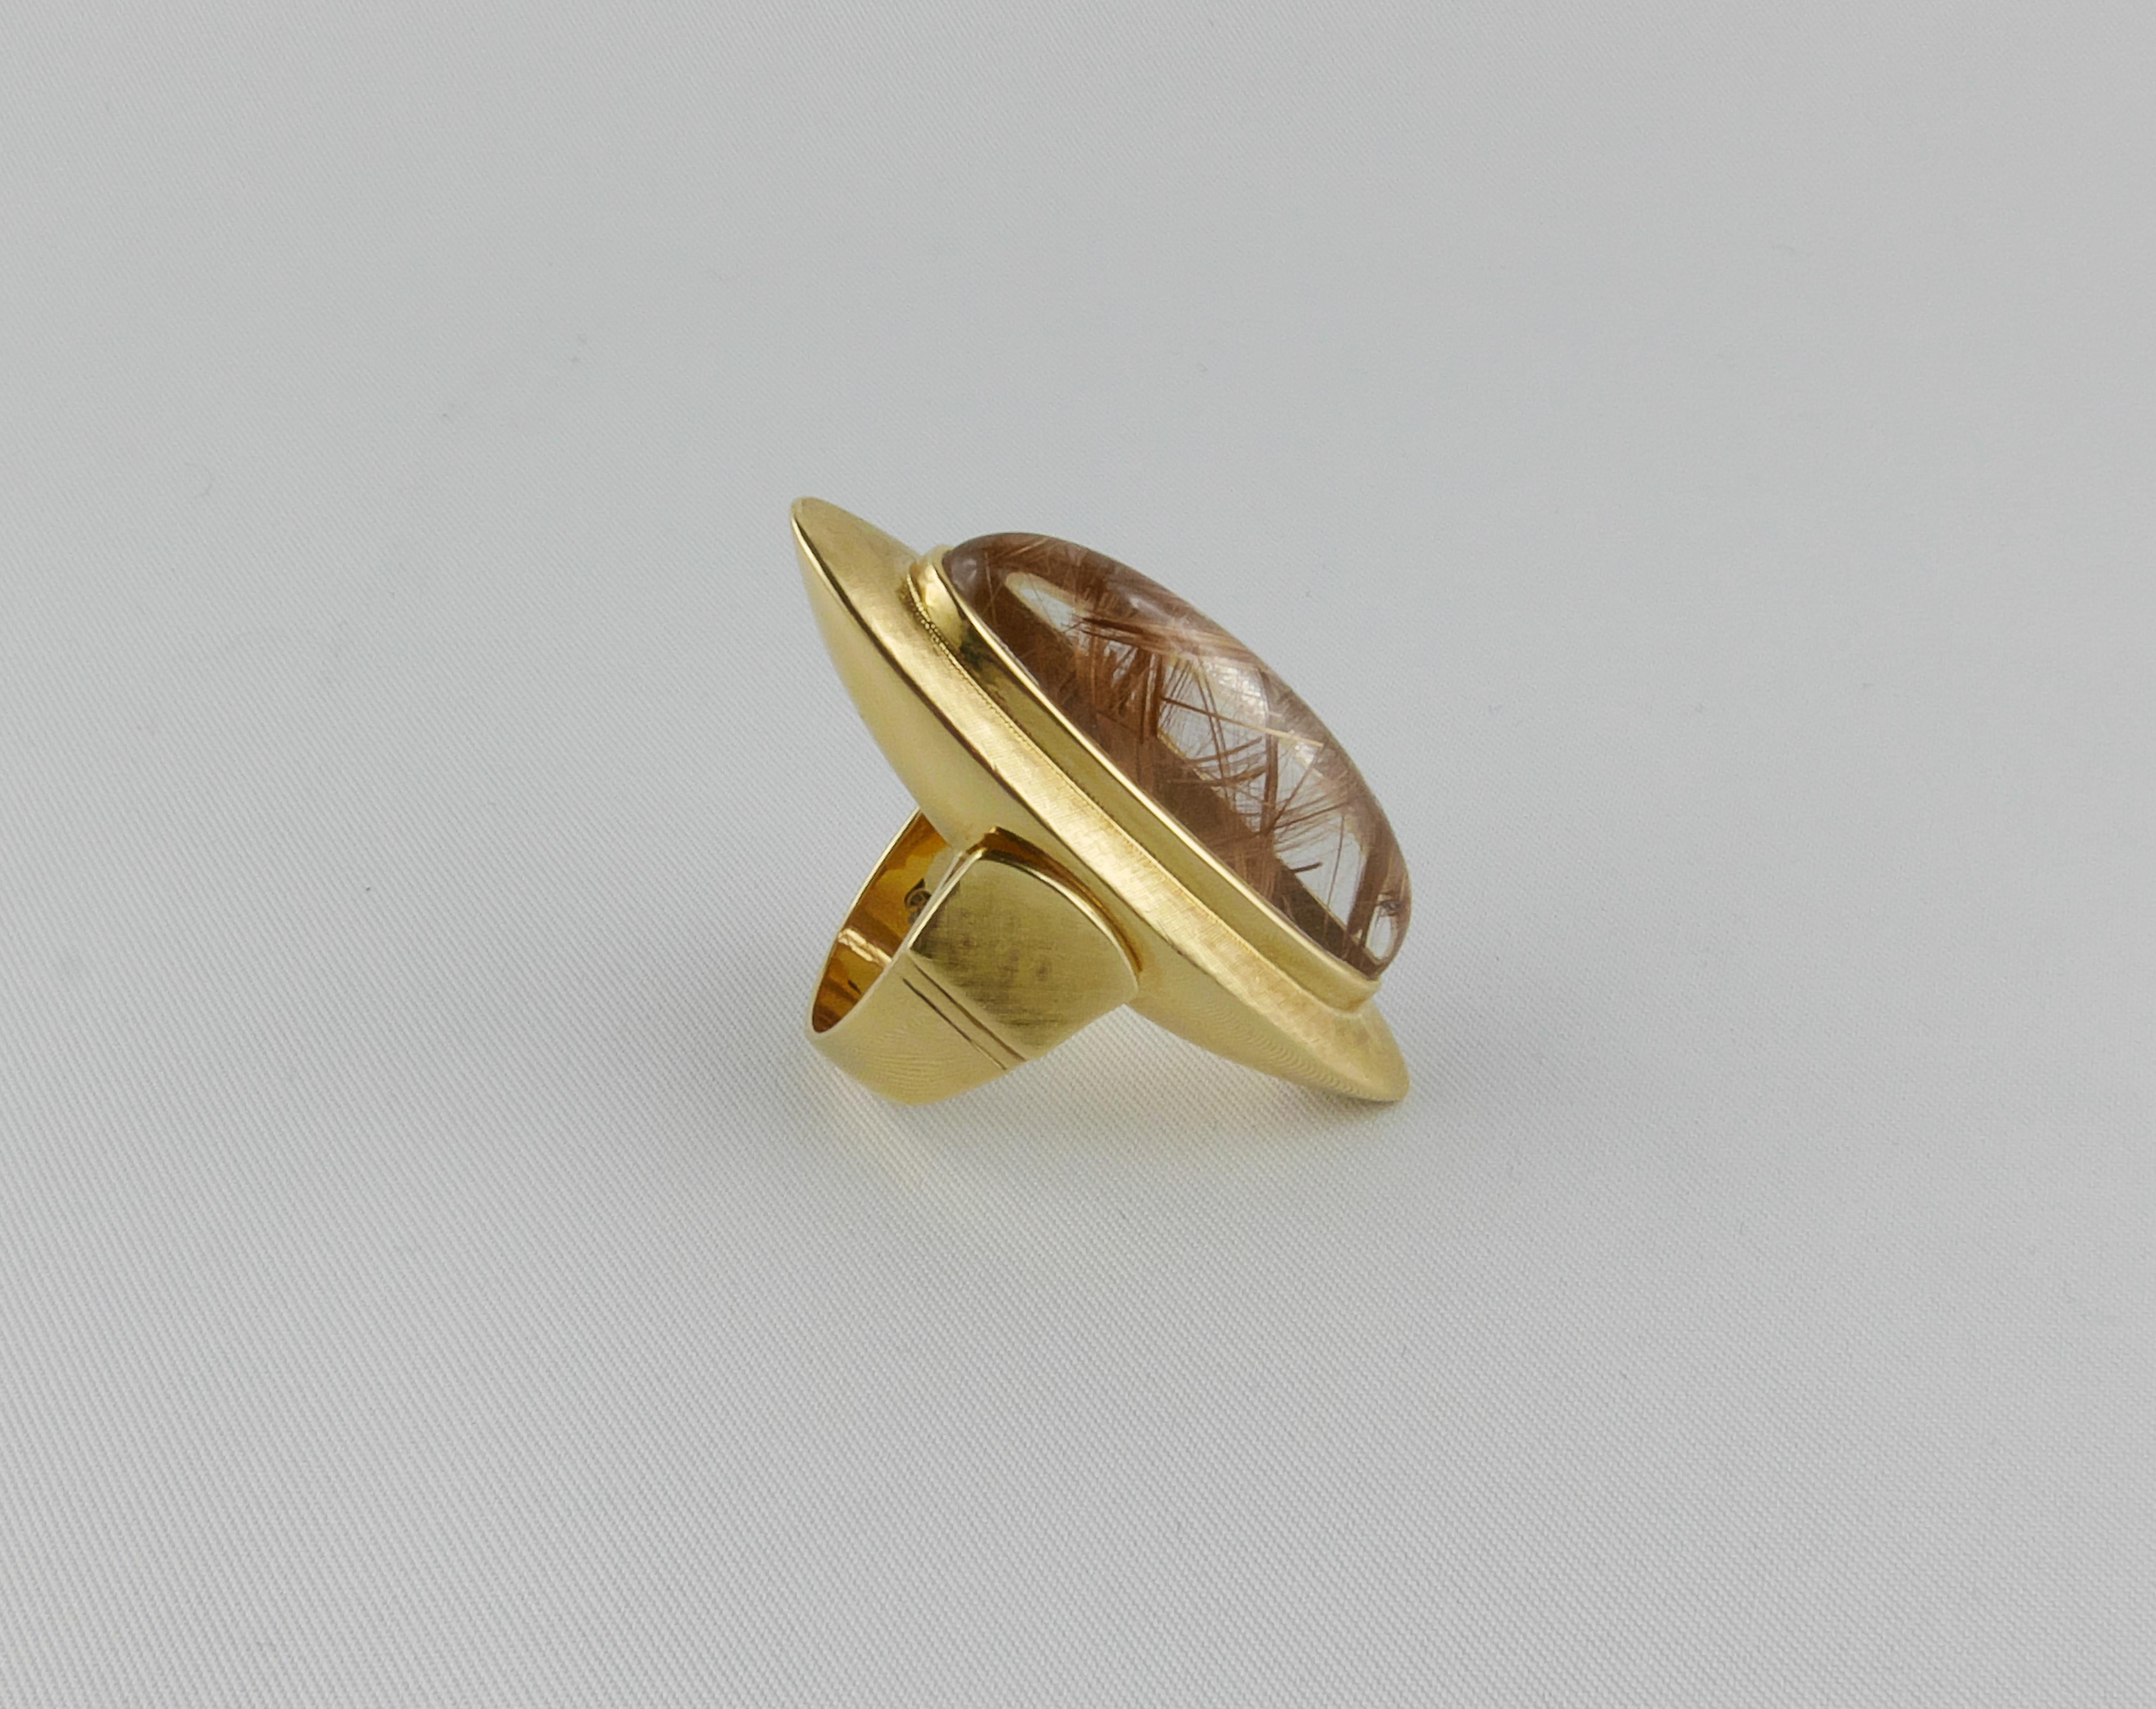 This eye-catching oval shaped Ring is a fine example of 1970s geometric audacious and beautiful design. Finely crafted in Italy  in 18k chunky satin textured Yellow Gold. The Ring is centered with an imposing Rutilated Quarz oval cabochon. This